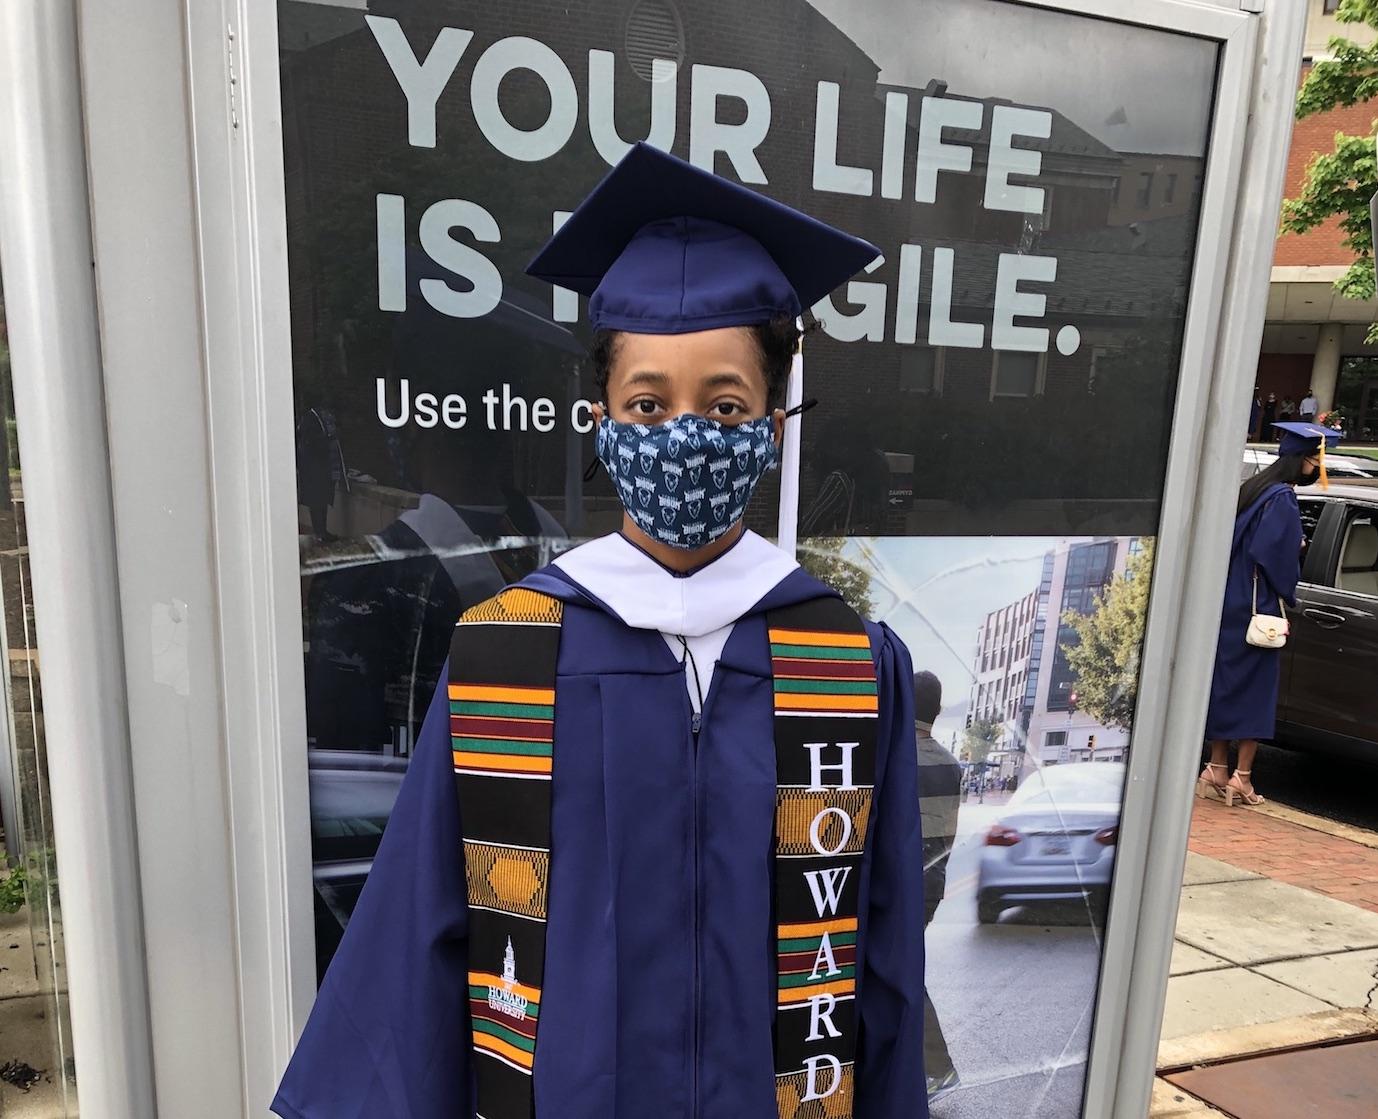 Senior Sarah Thorne shares what it's like to graduate during a pandemic